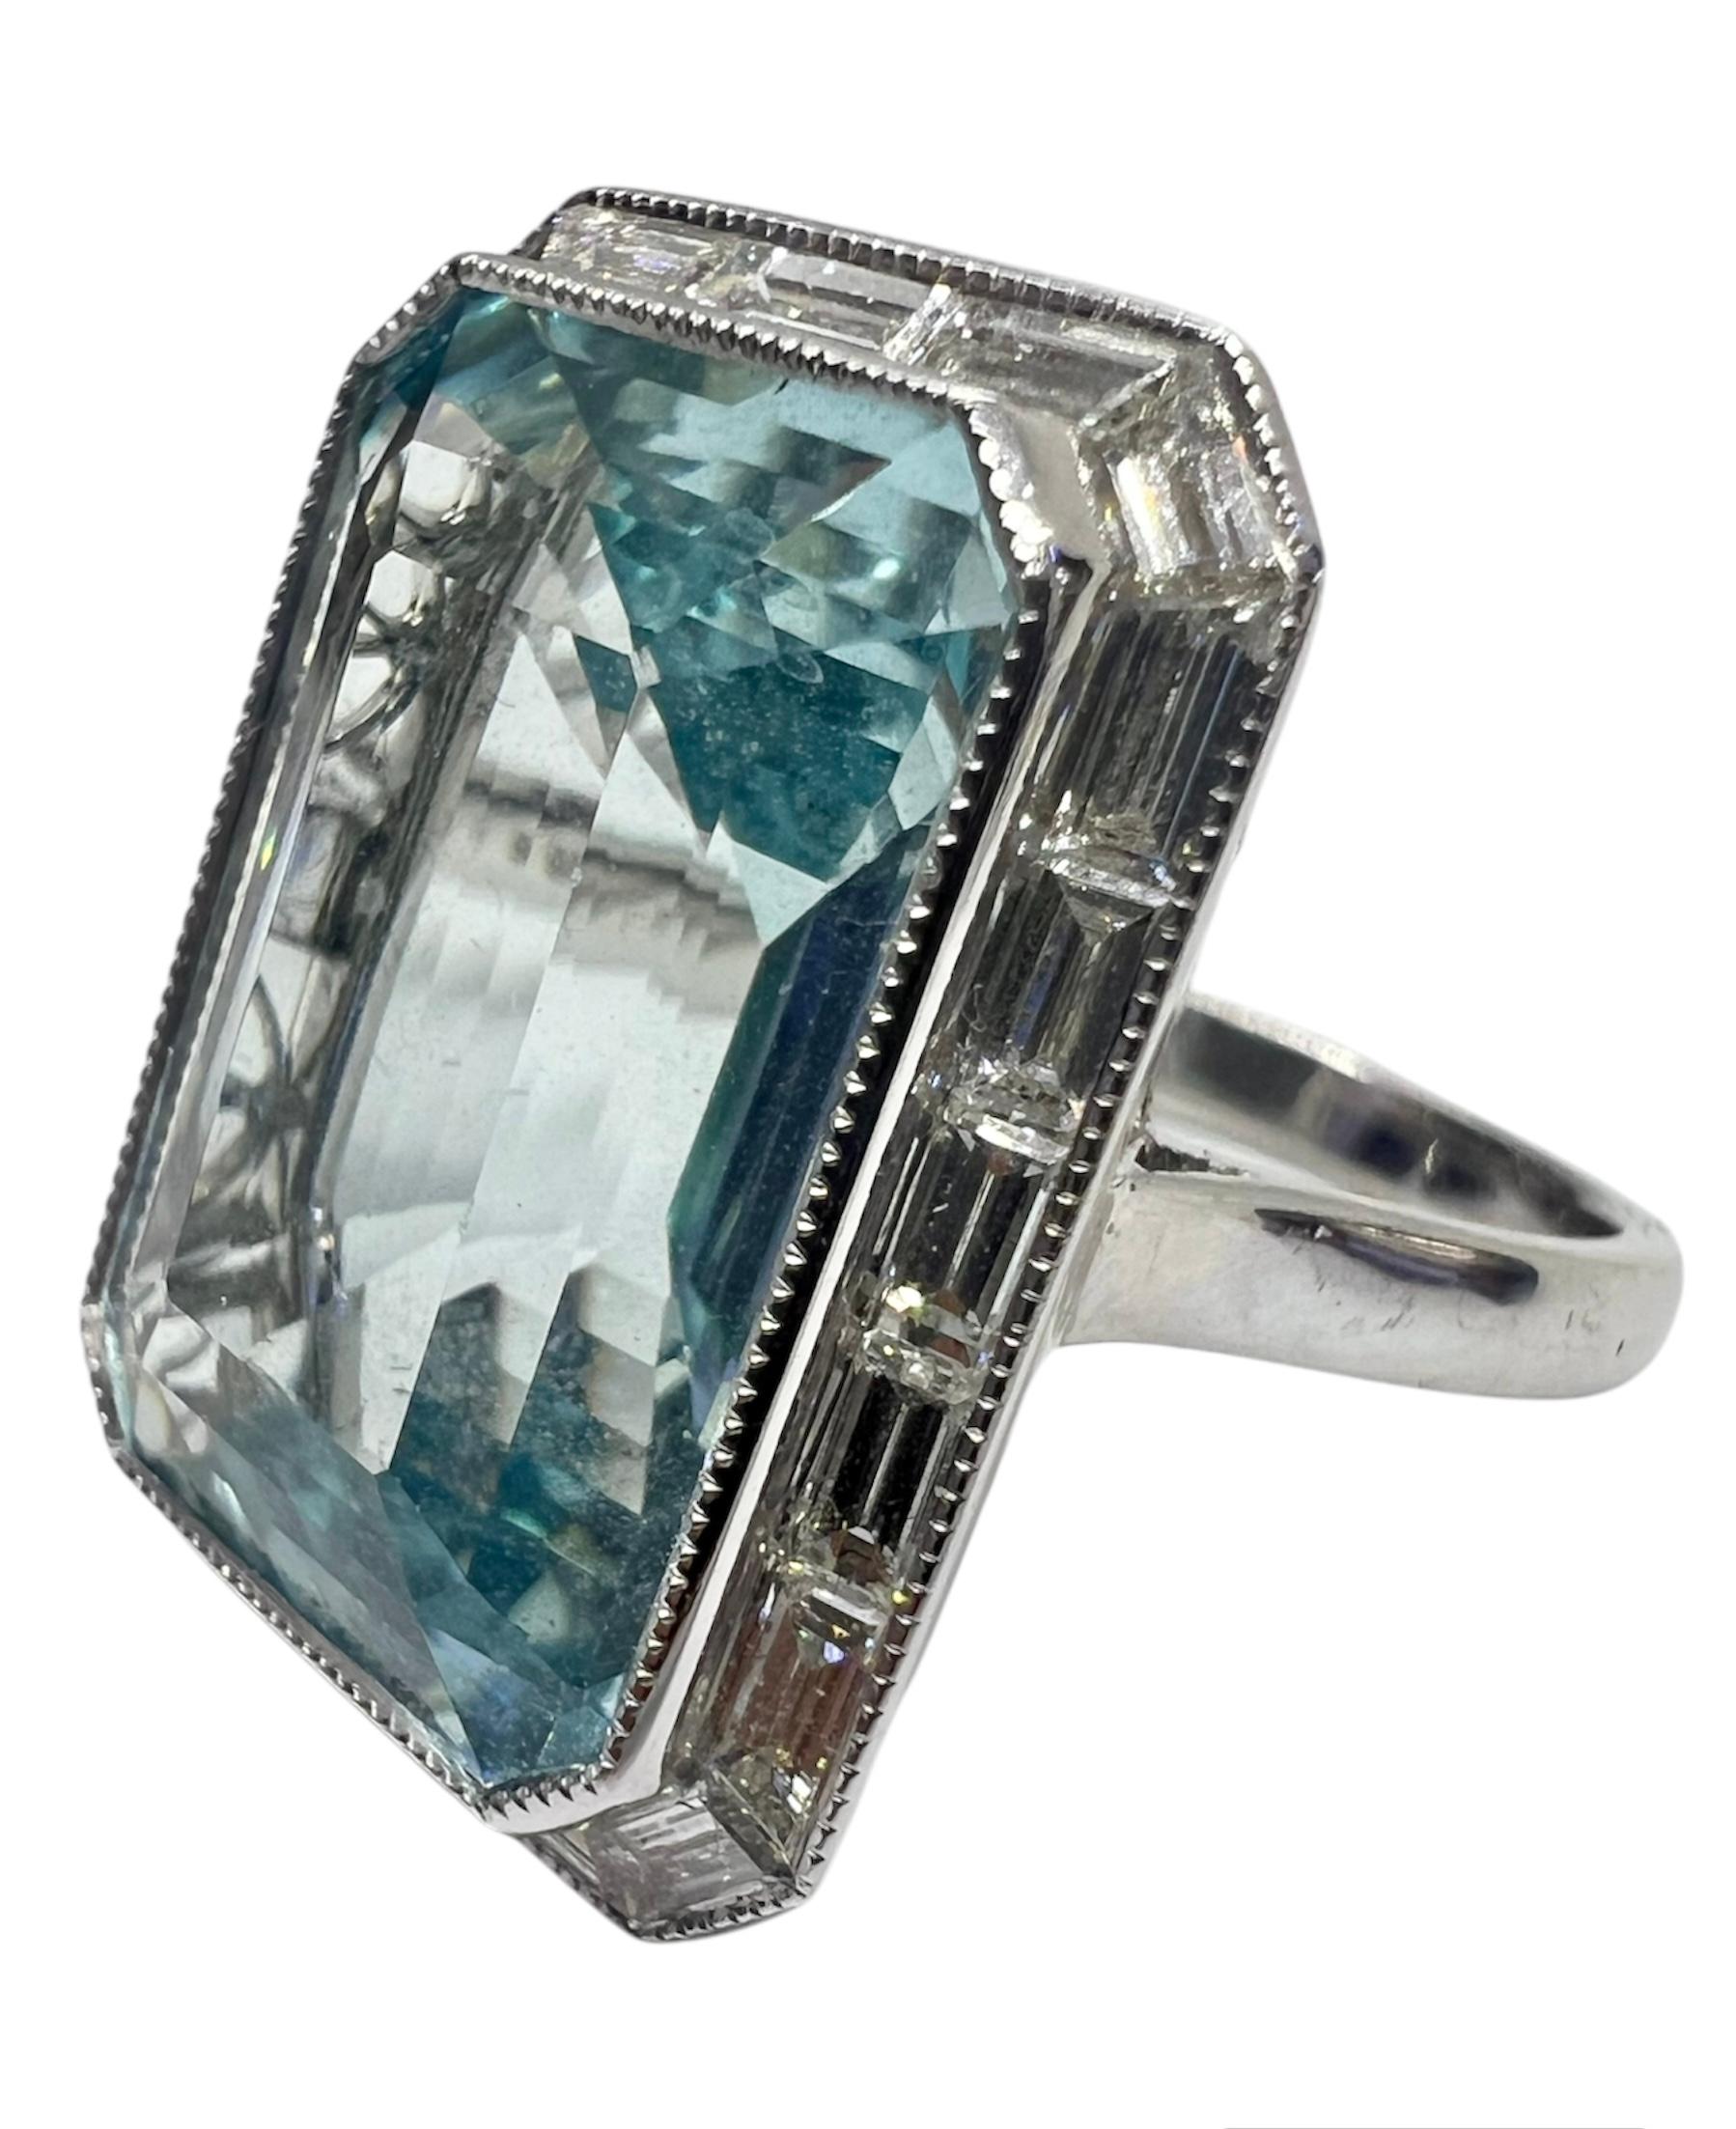 Platinum ring with 14.14 carat aquamarine and 1.43 carat diamond.

Sophia D by Joseph Dardashti LTD has been known worldwide for 35 years and are inspired by classic Art Deco design that merges with modern manufacturing techniques.